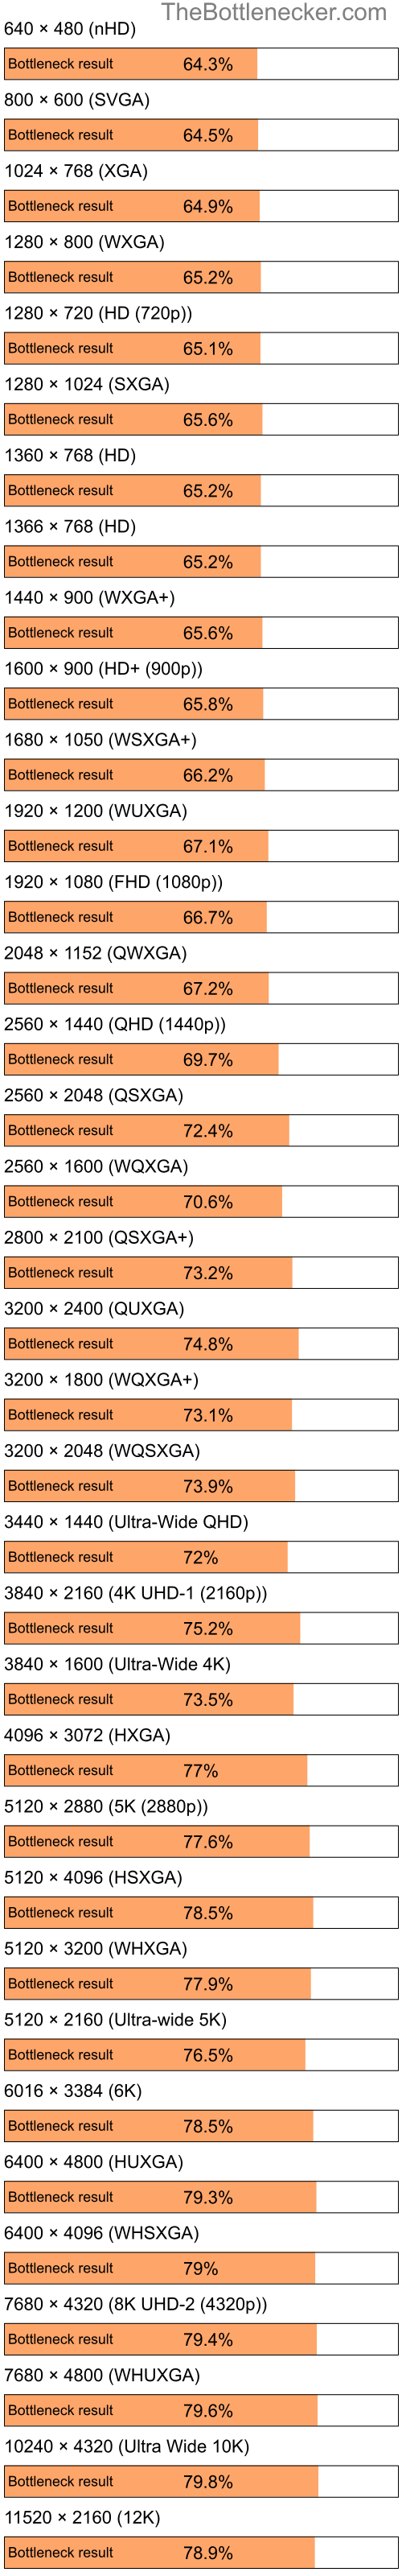 Bottleneck results by resolution for Intel Celeron M and AMD Mobility Radeon 4100 in General Tasks